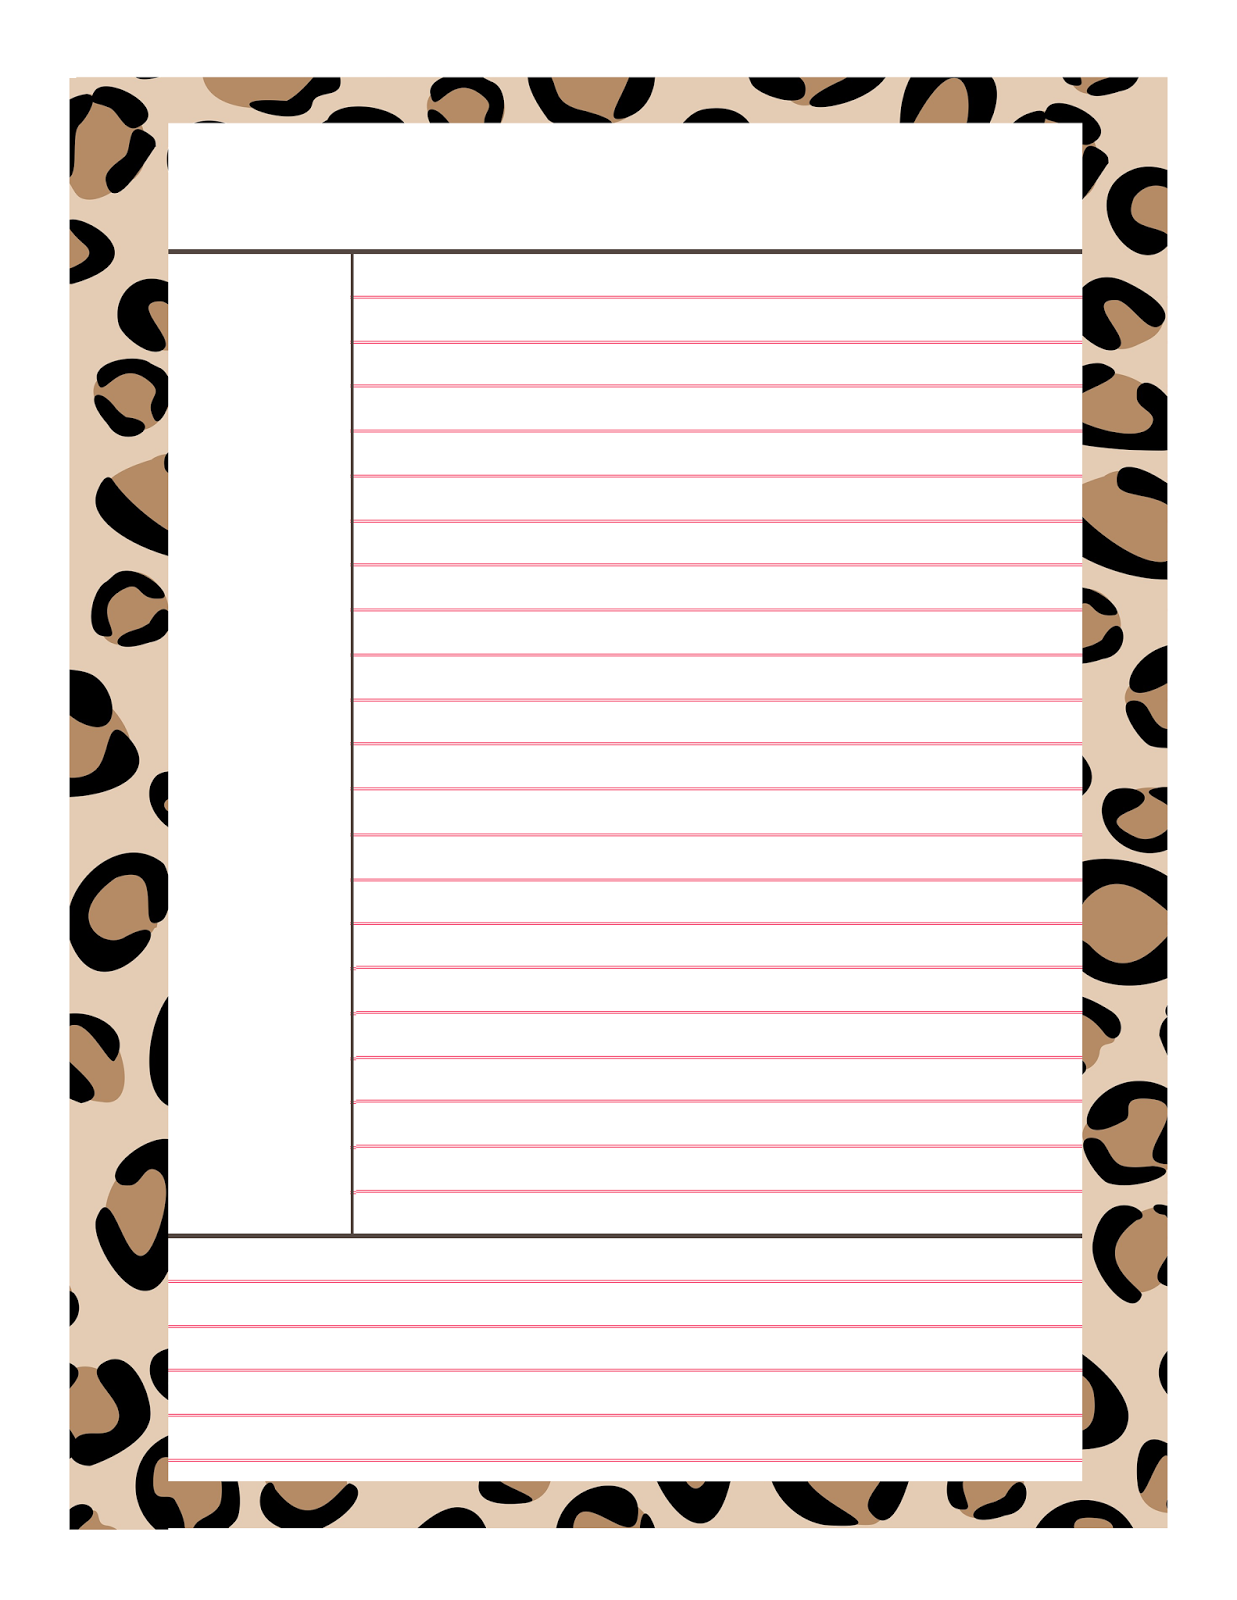 9-best-images-of-note-printable-template-cornell-note-paper-printable